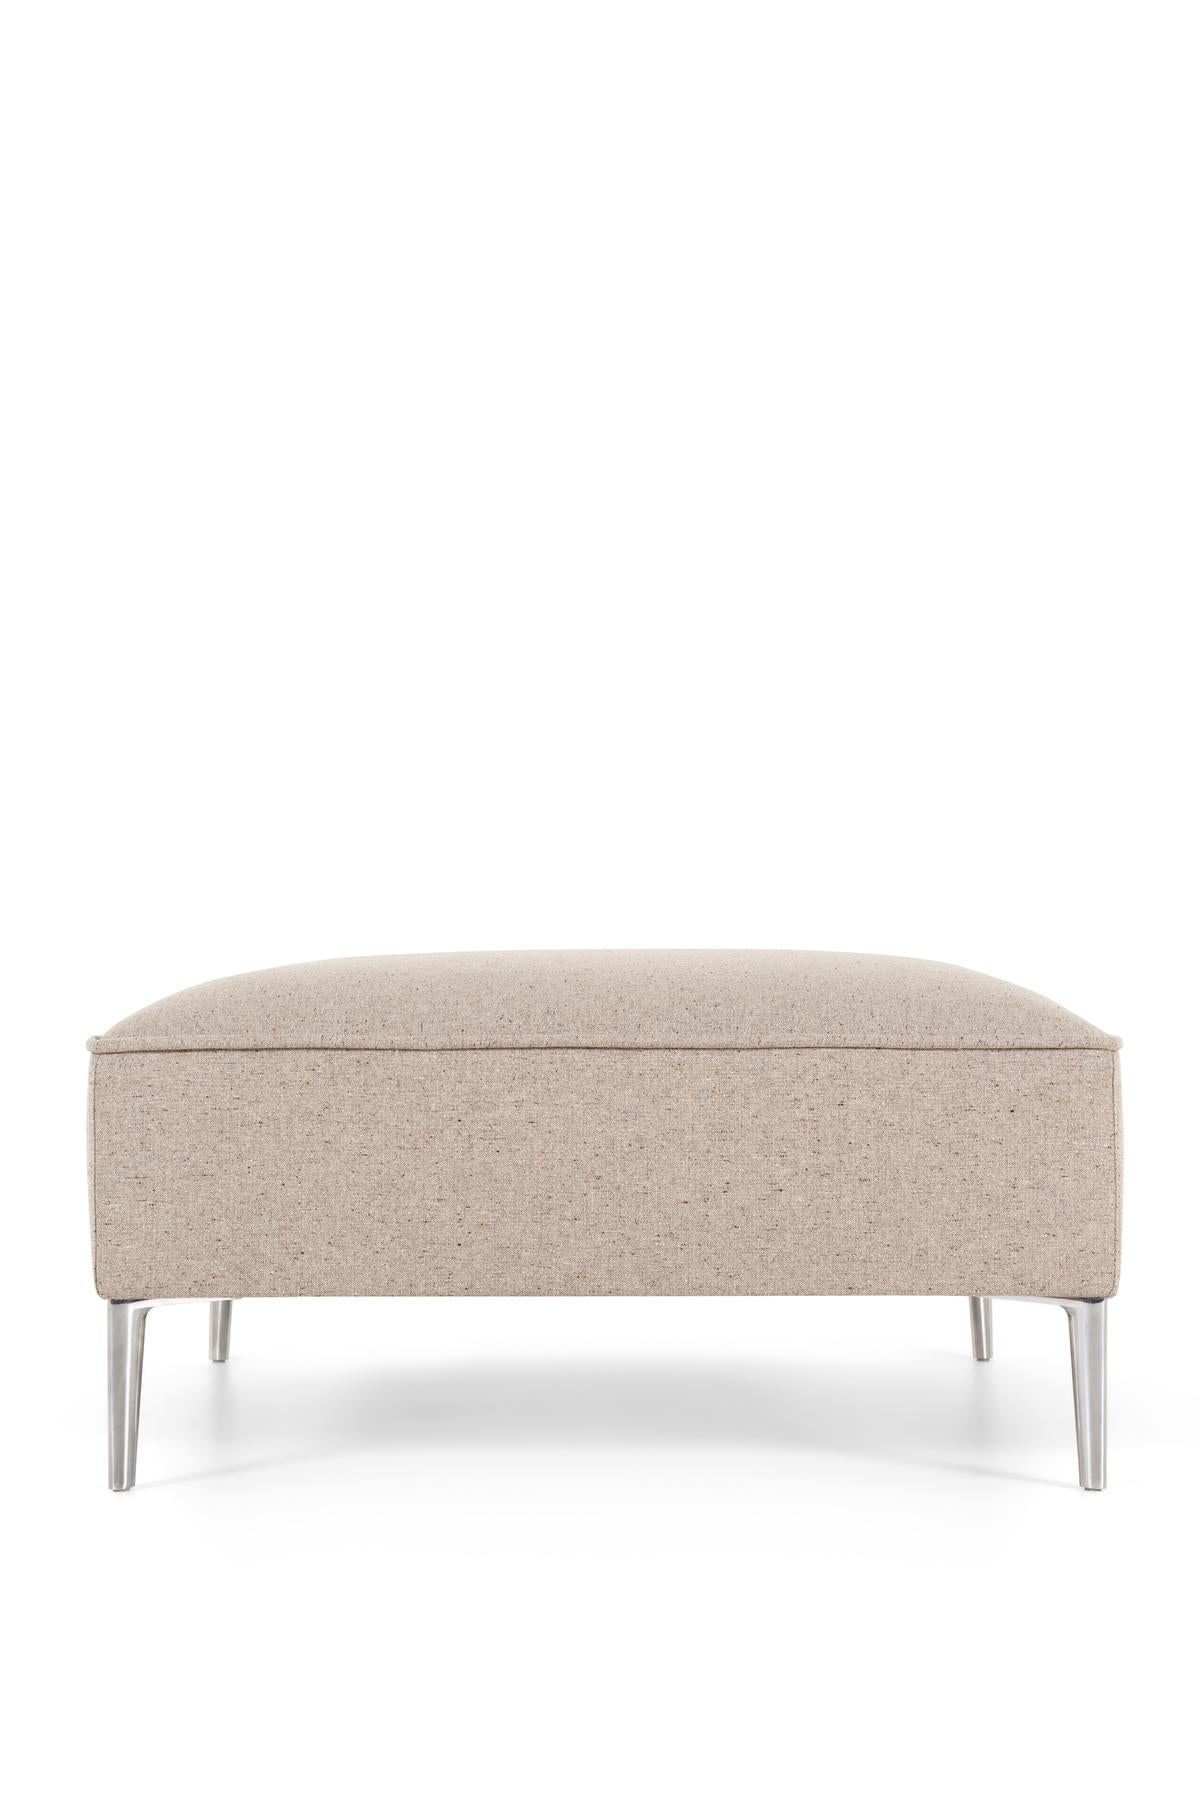 Dutch Moooi Sofa So Good Footstool in Solis Paper Upholstery & Polished Aluminum Feet For Sale